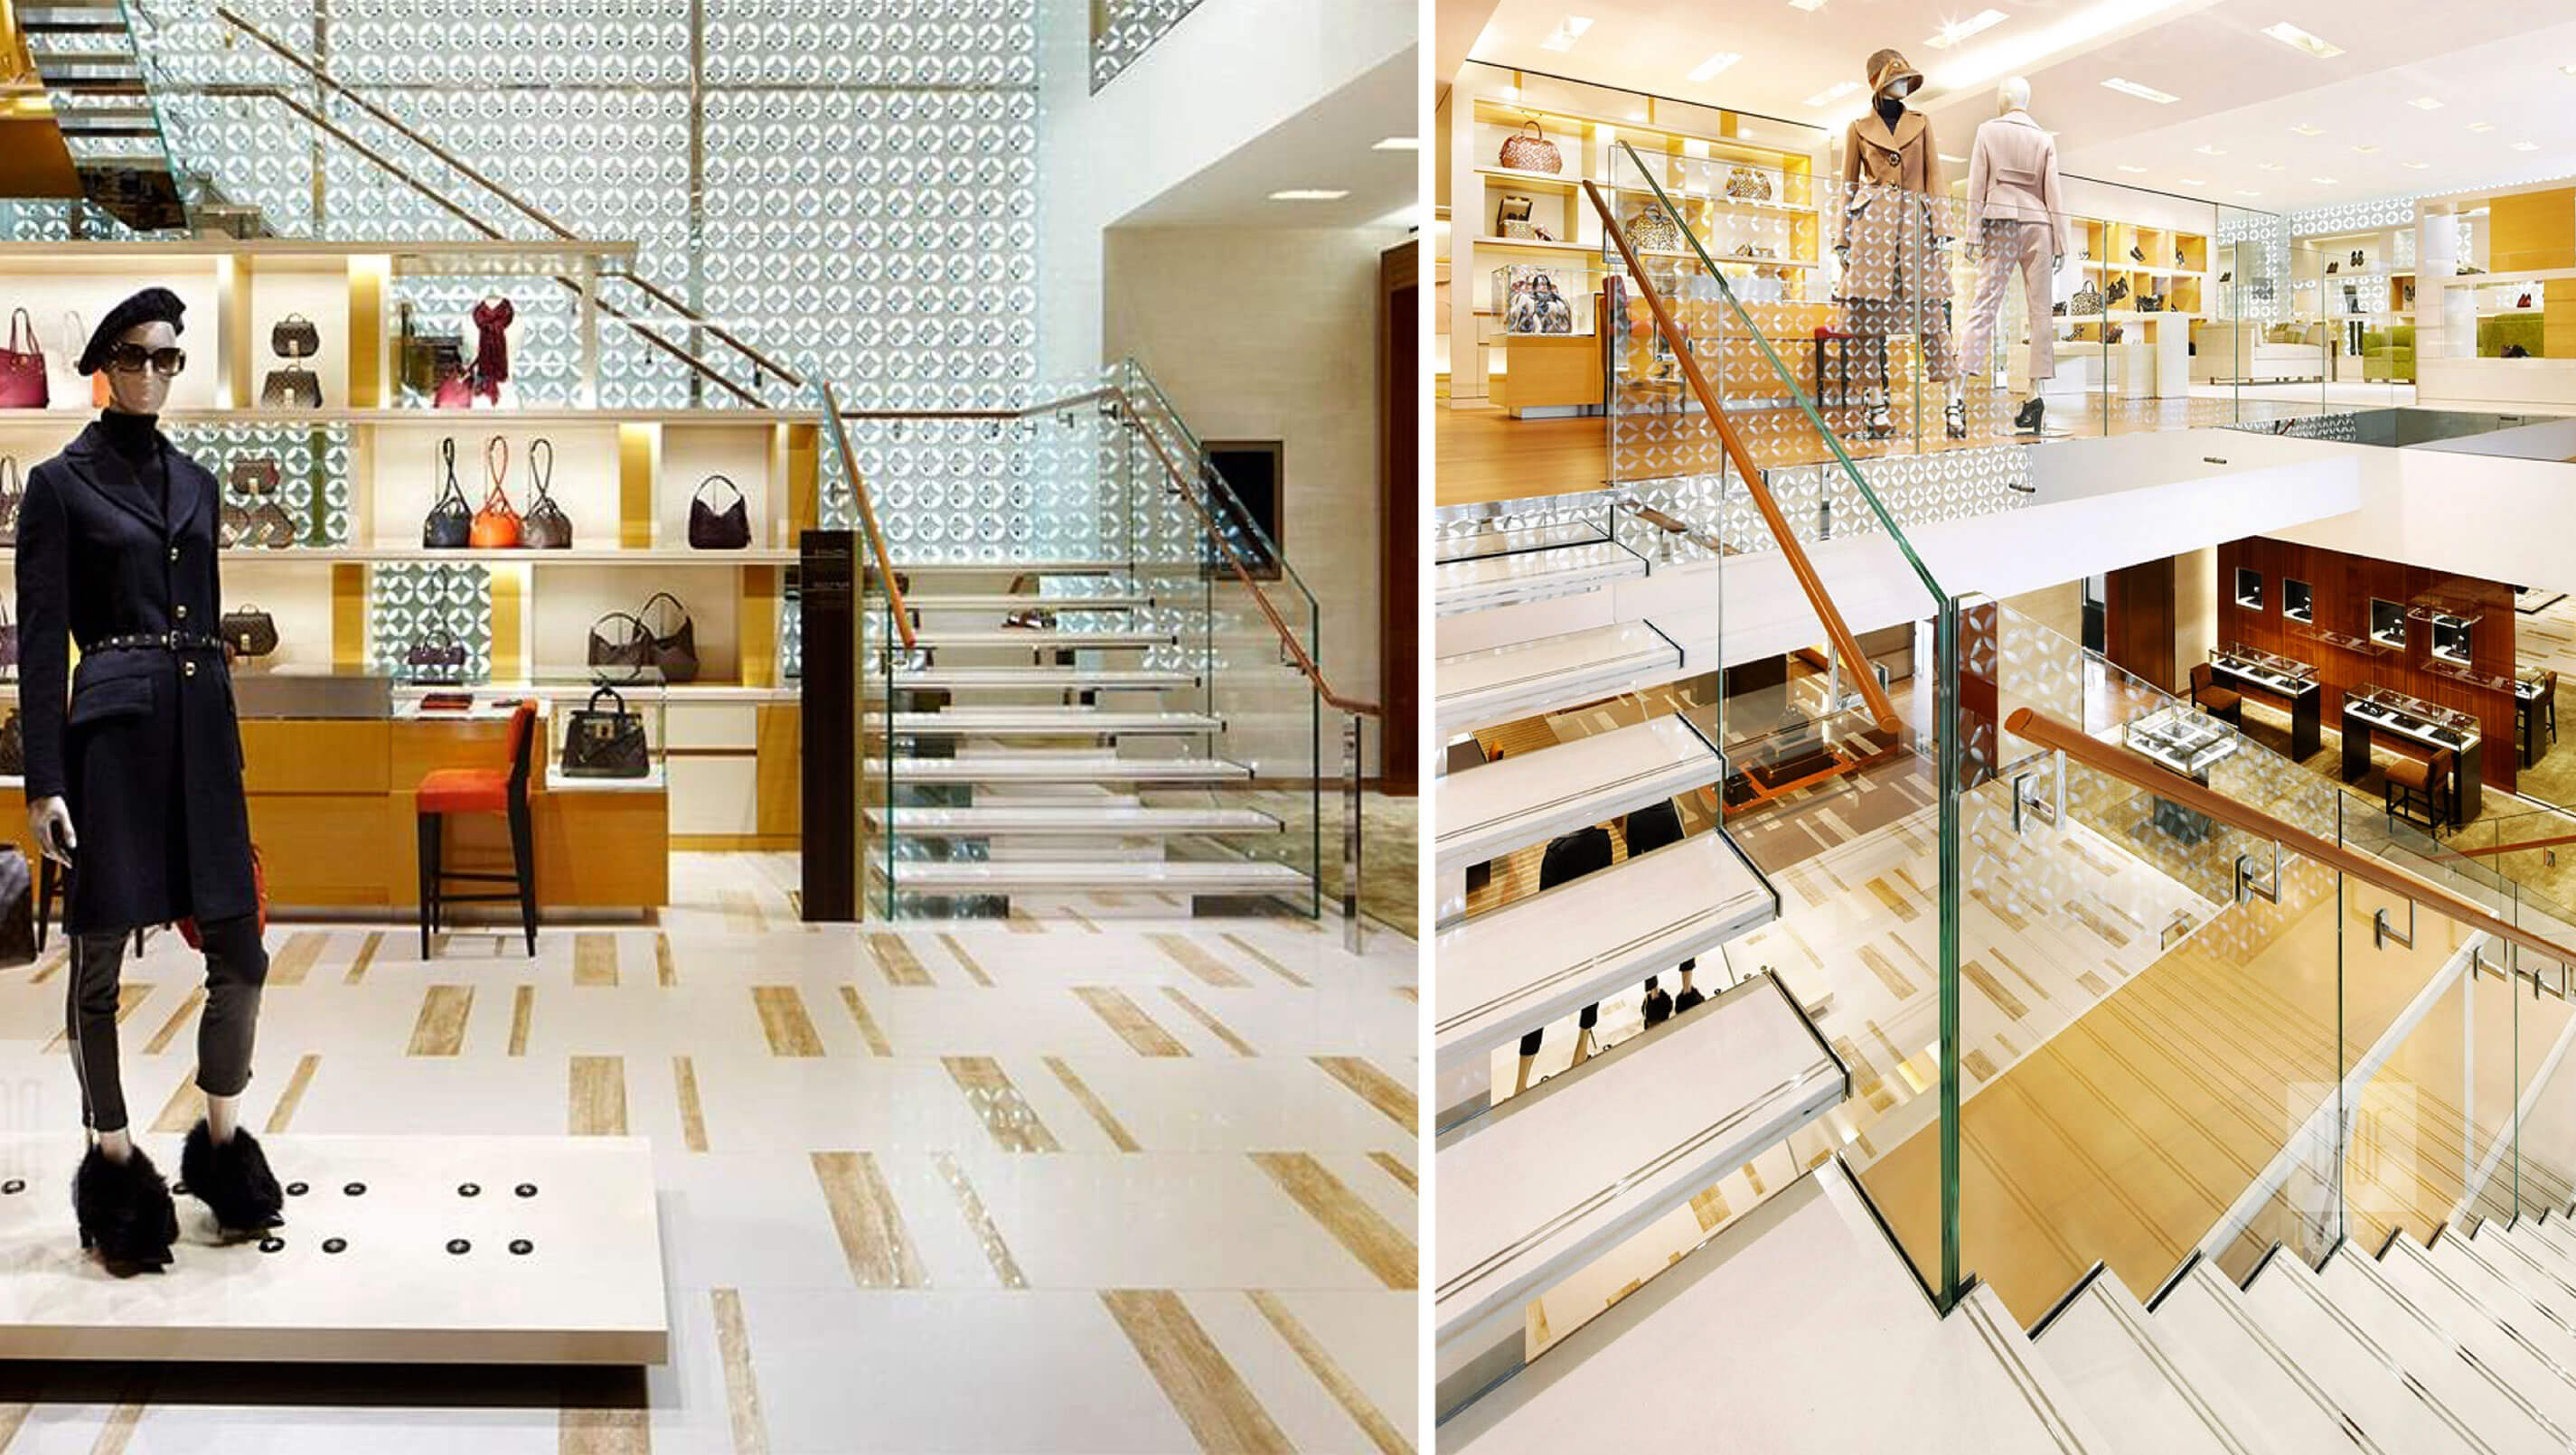 Façade and Architectural Stairs at Louis Vuitton Toronto - Feature Walters